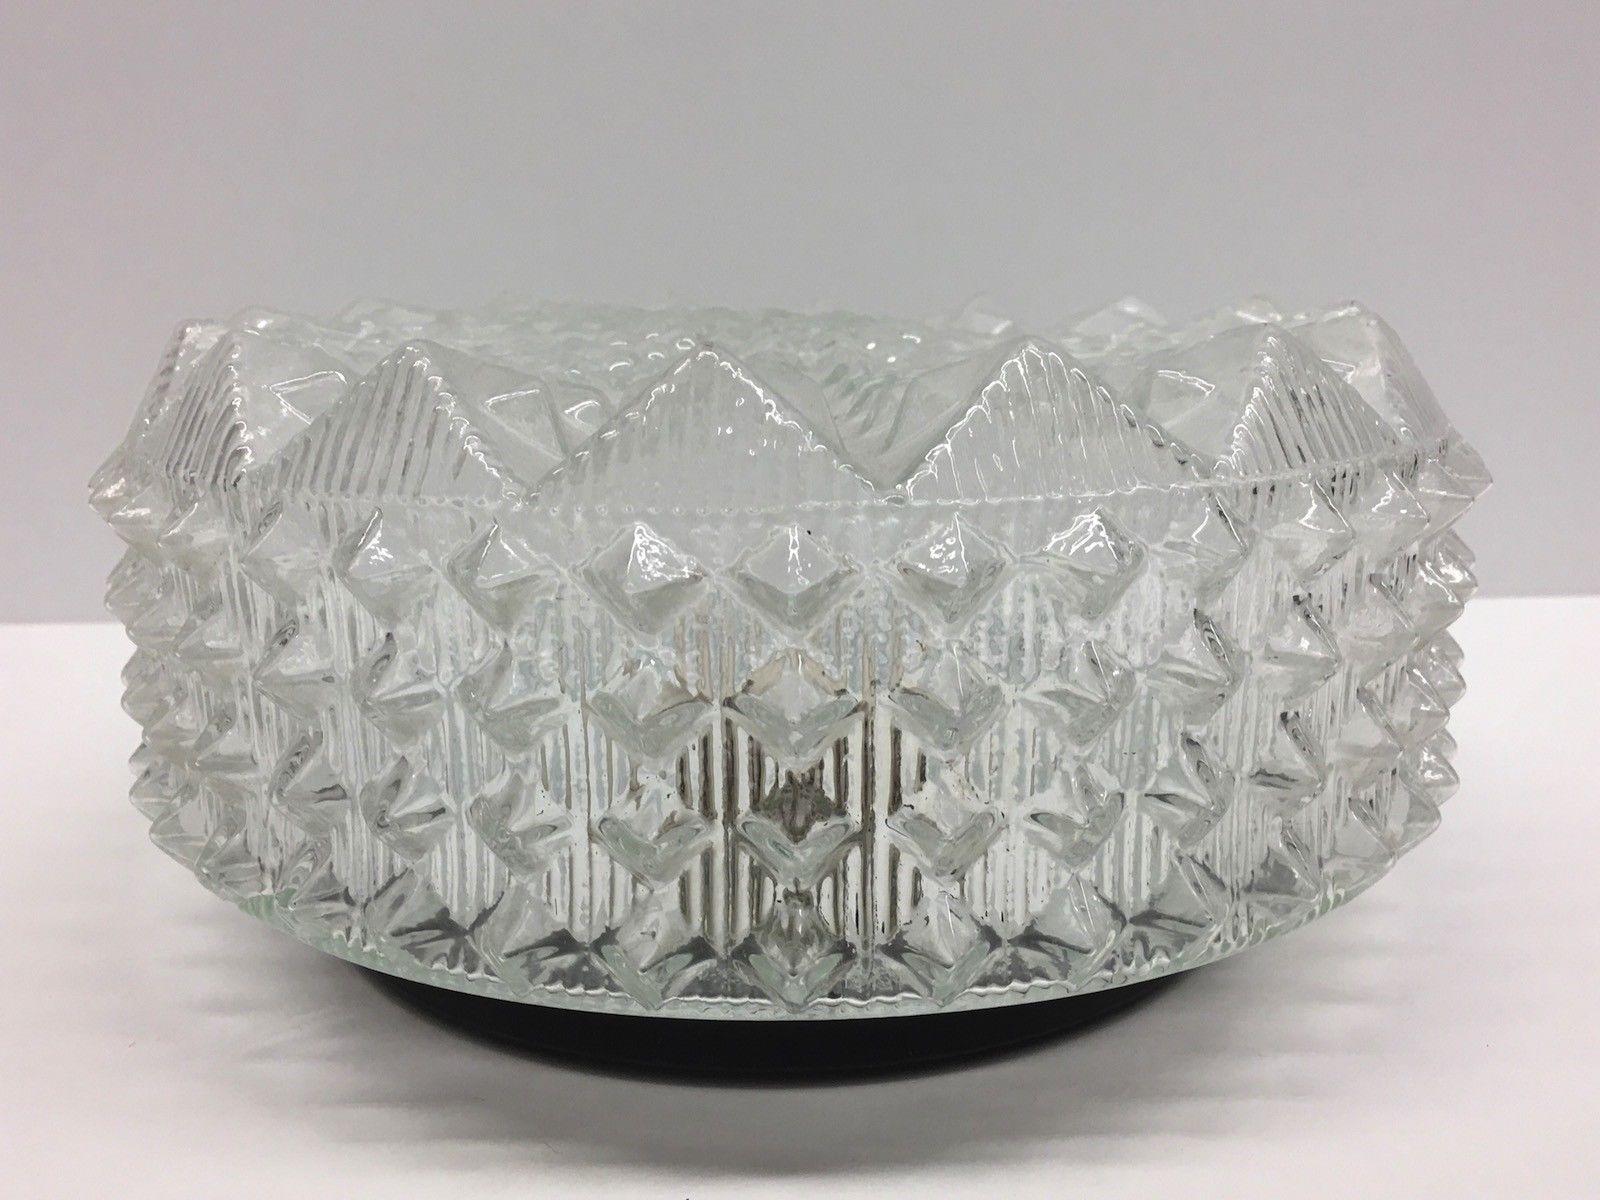 Beautiful ice crystal textured flush mount. Made in Germany. Gorgeous textured glass flush mount with metal fixture. The fixture requires one European E27 Edison bulb up to 75 watts.